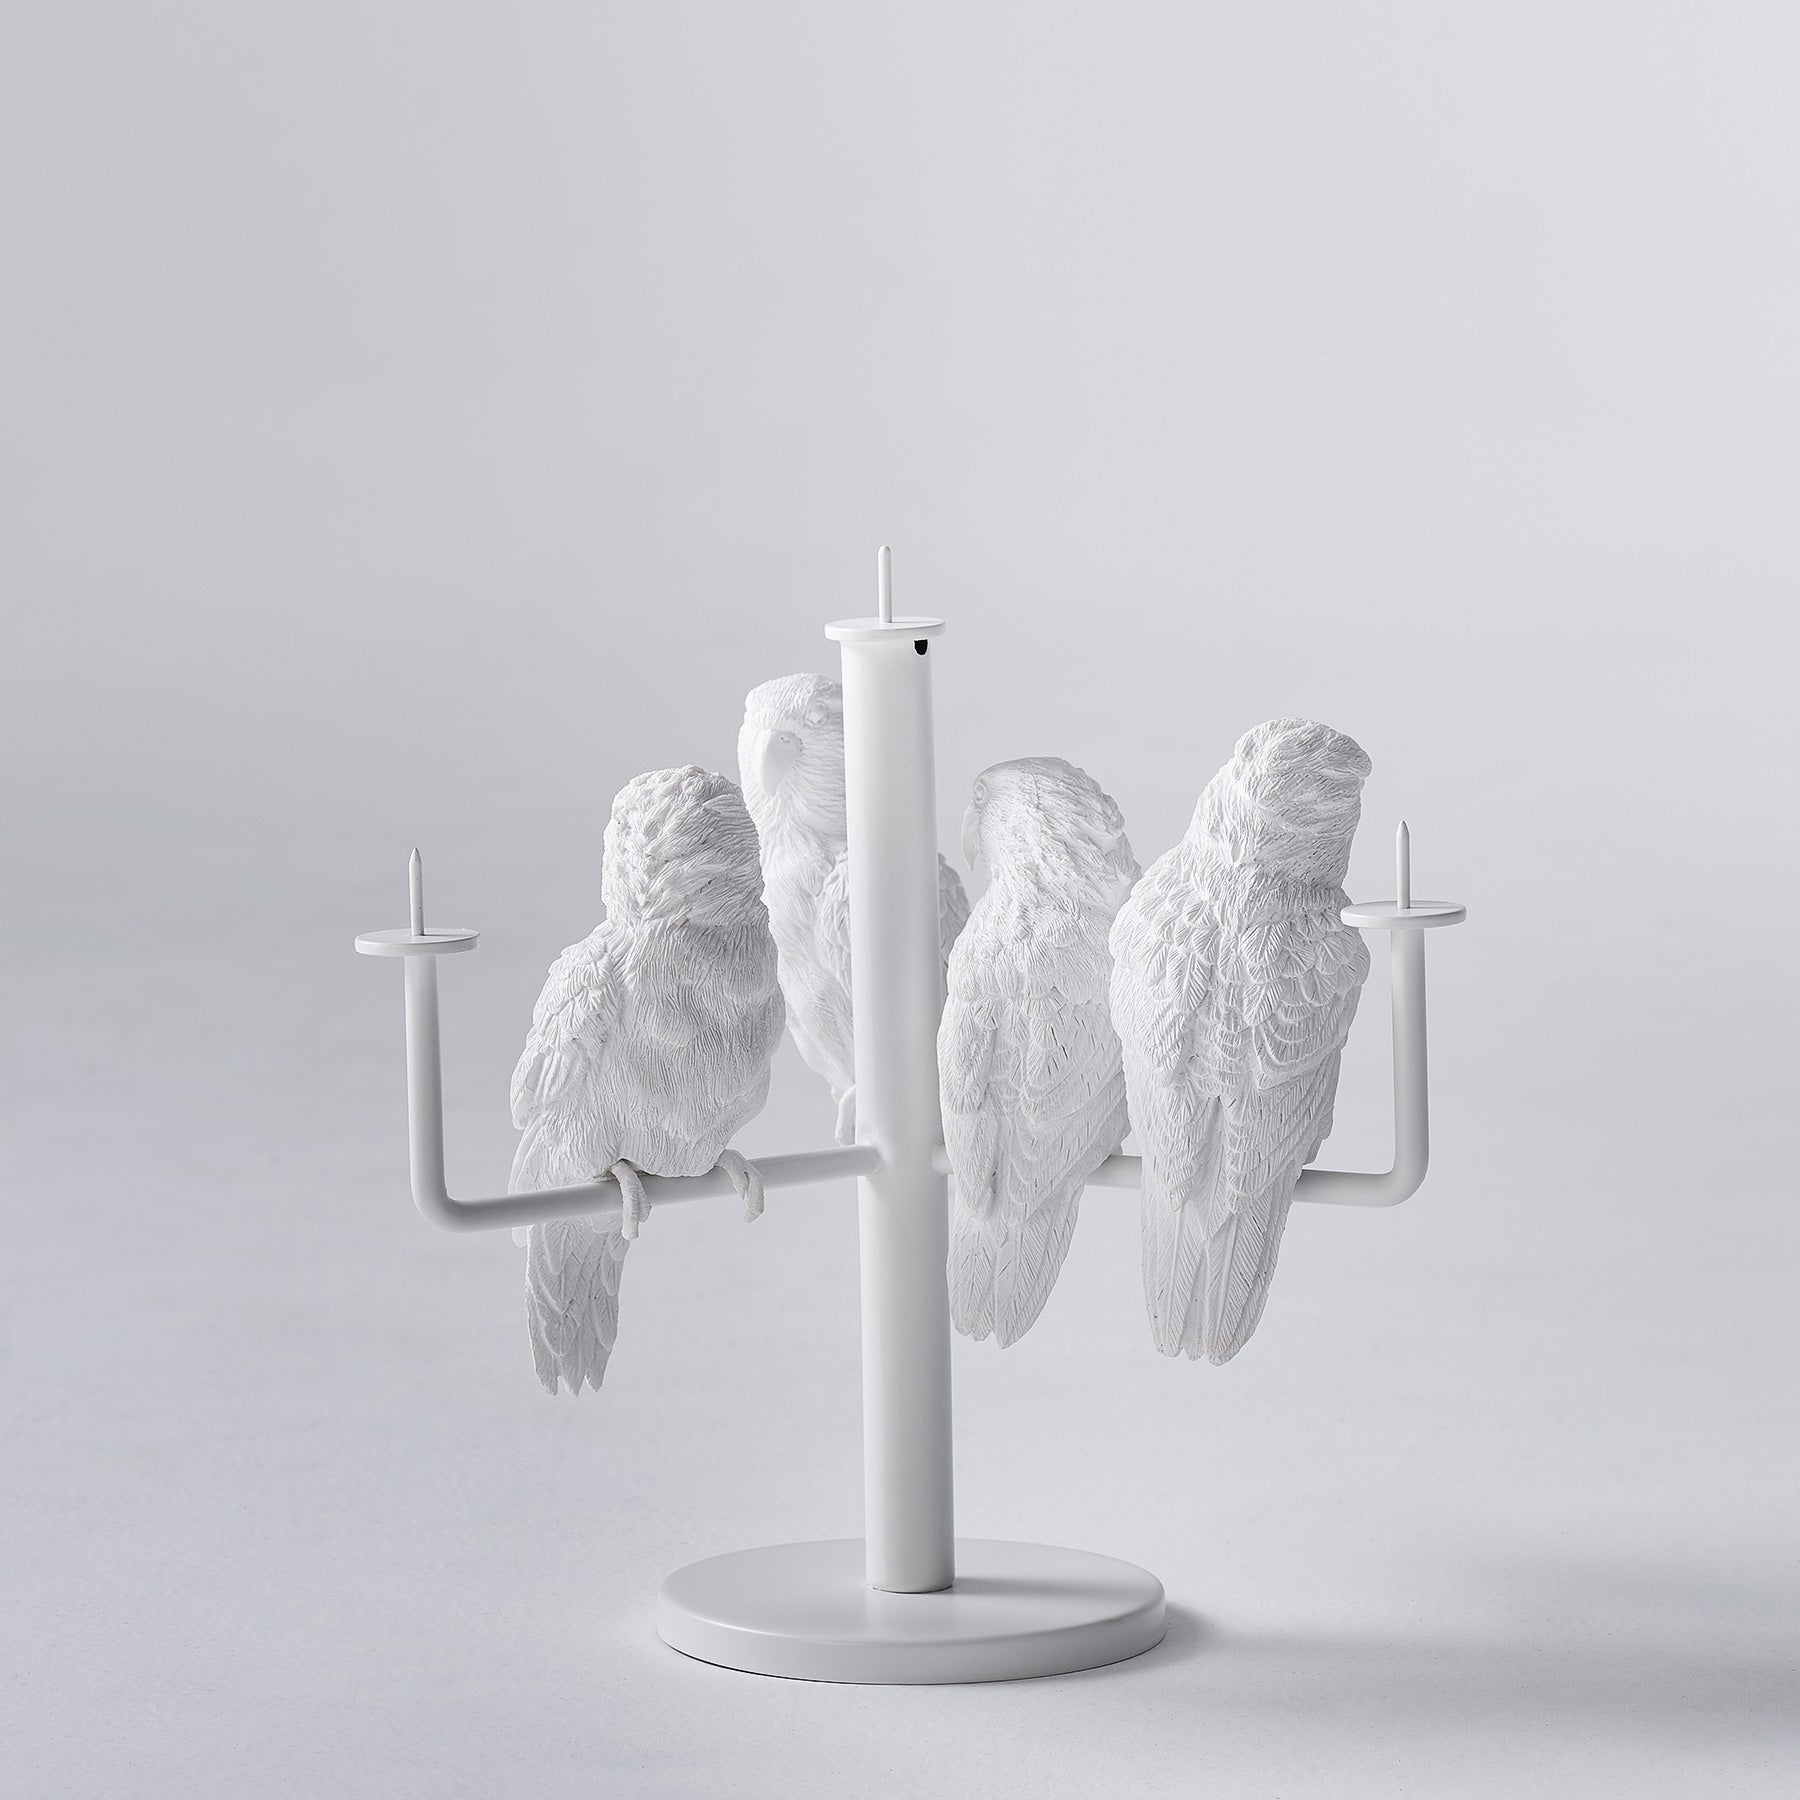 White Candle Holder for 4 Four Candle with Resin Parrot Sculpture for Home Decor Accessories Invite Parrots to Chat or Dinner in Peace & Naturality